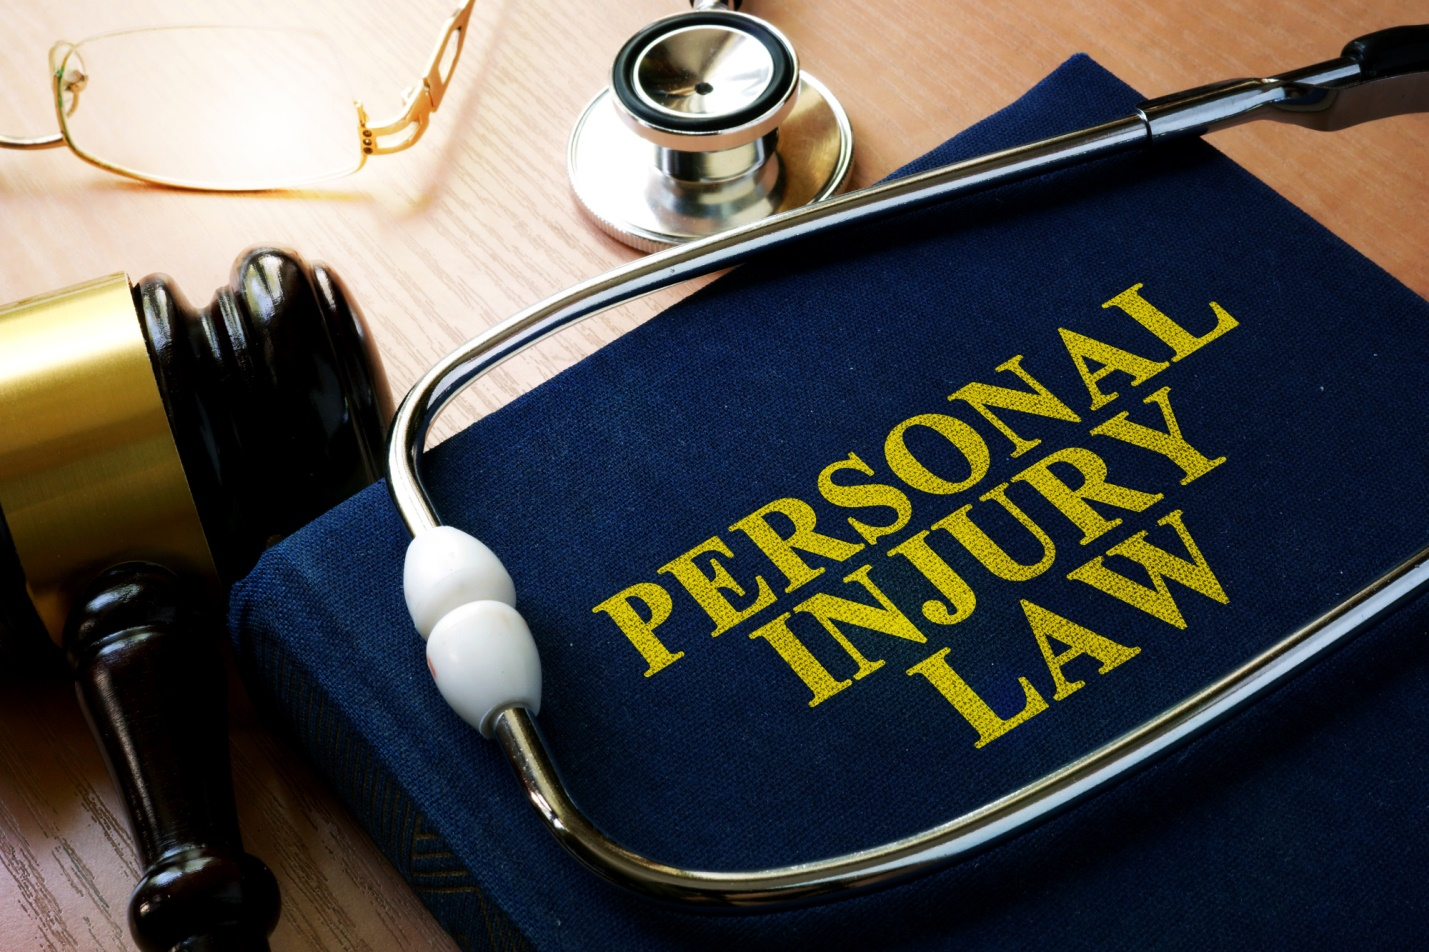 11 Questions to Ask Before Hiring a Personal Injury Attorney